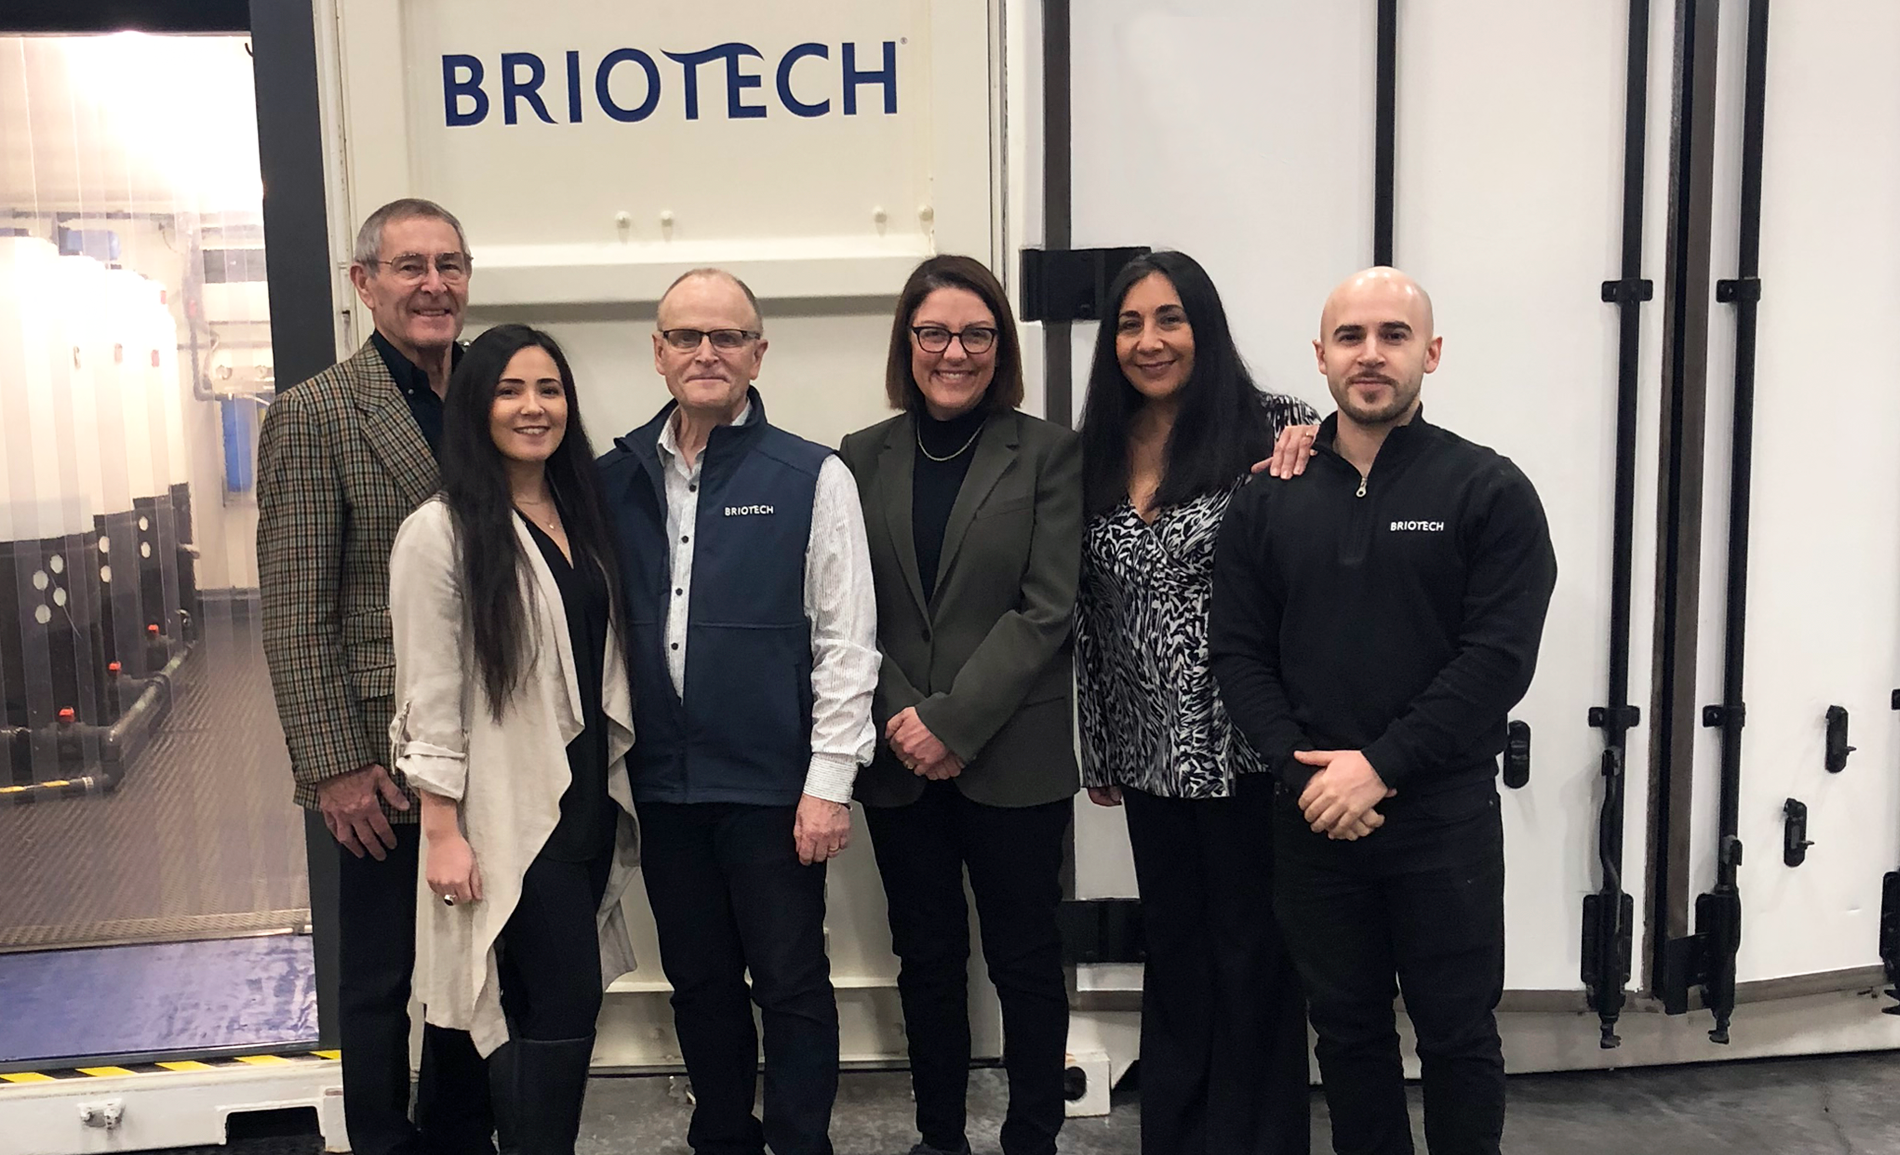 A Tour and Talk at Briotech with Congresswoman Suzan DelBene